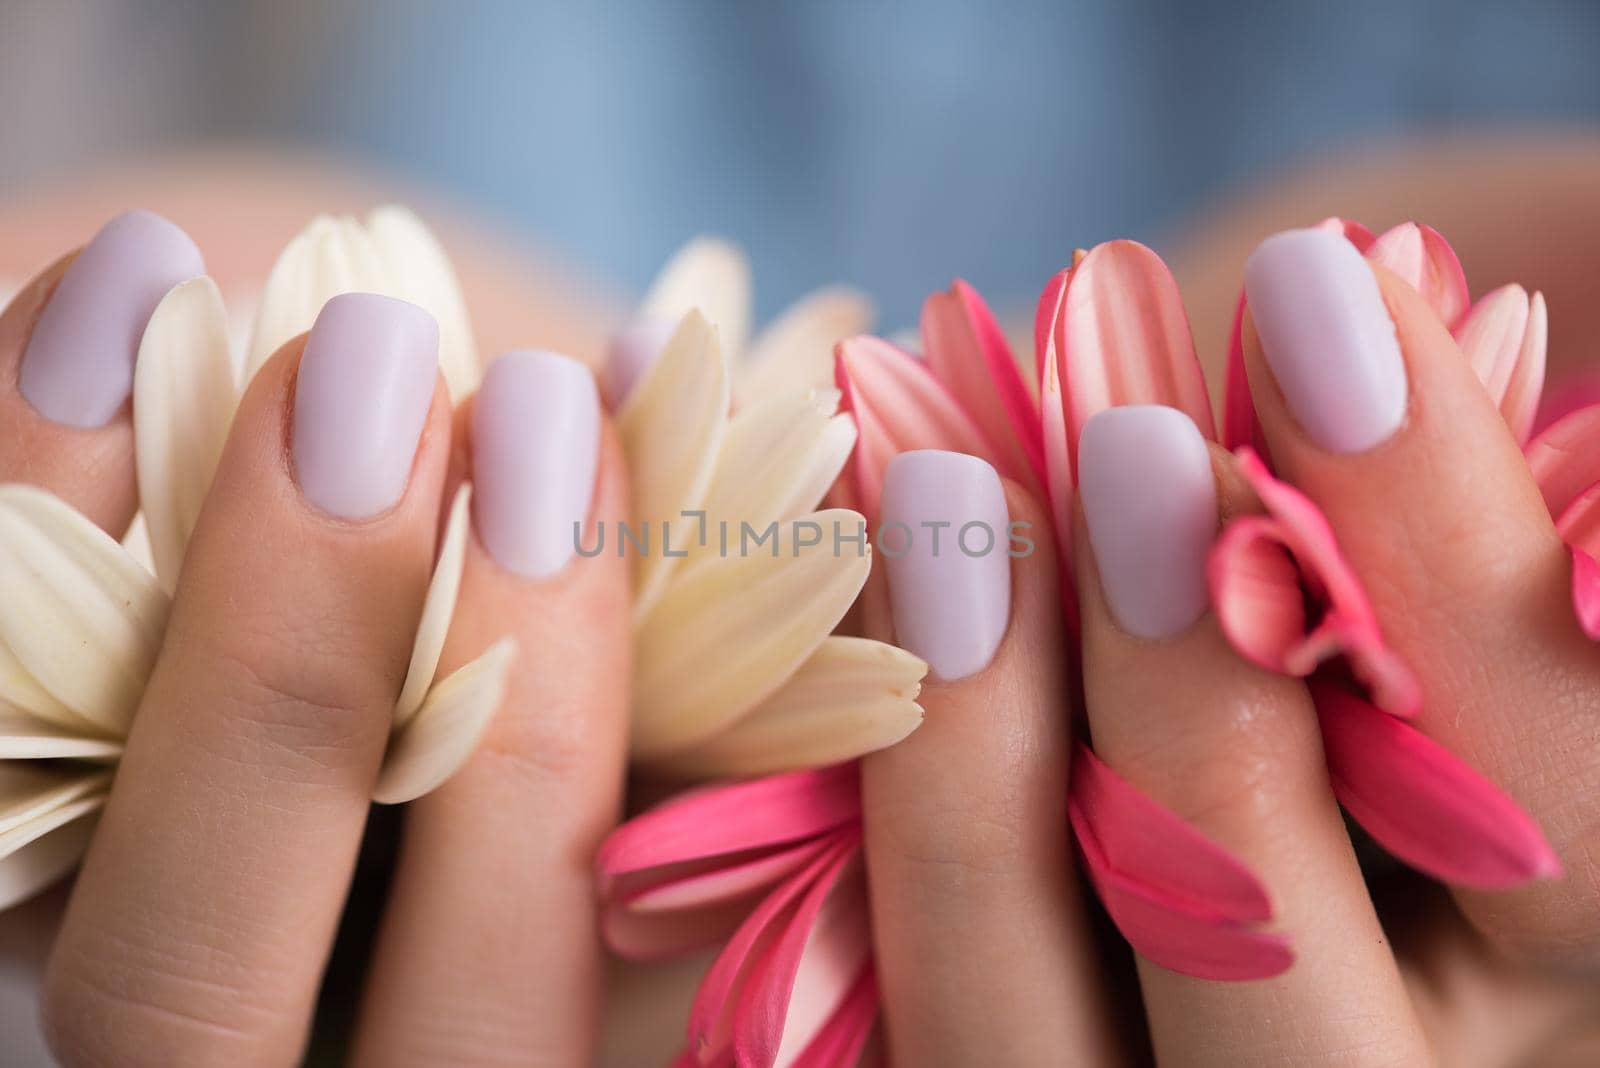 beauty delicate woman hands with manicure holding flower close up